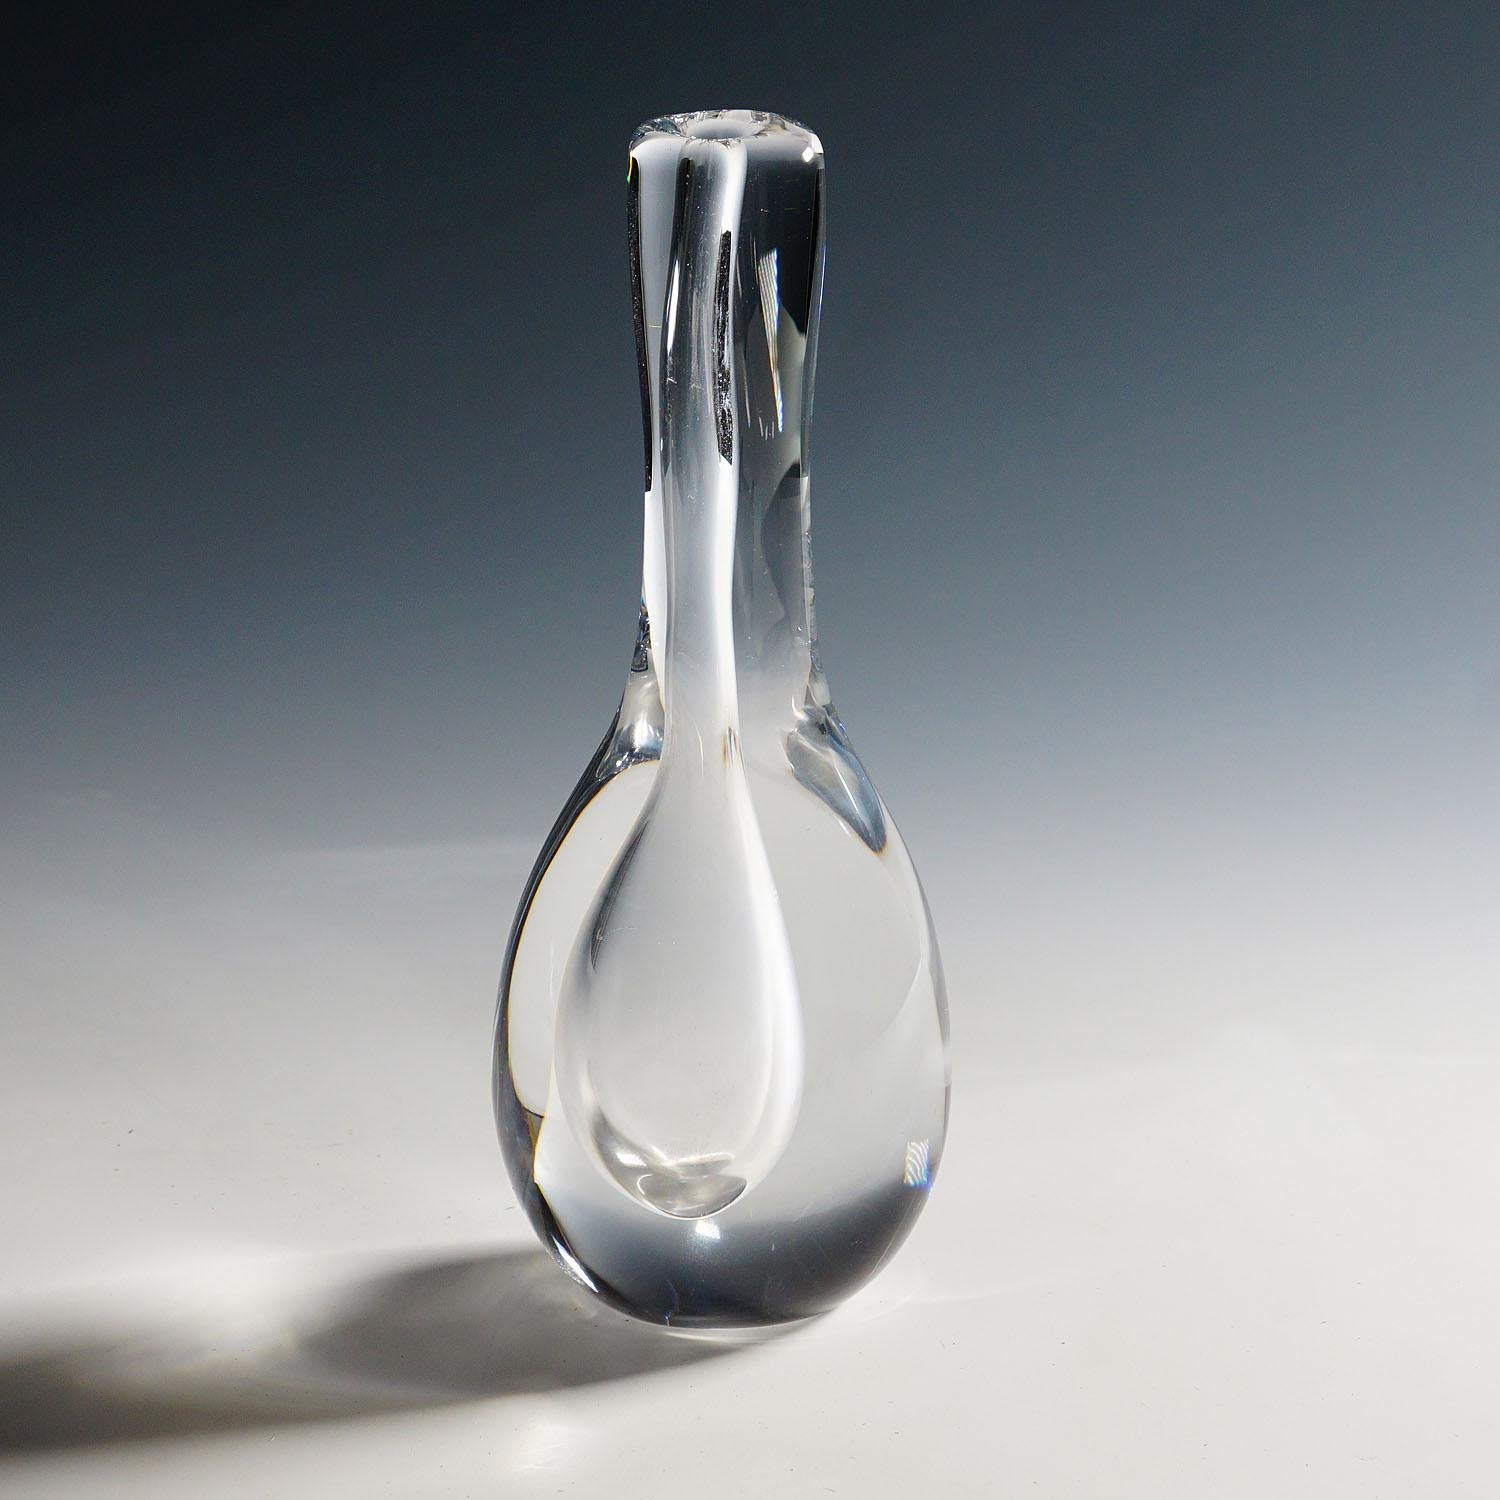 Raindrop Vase by Göran Wärff for Kosta 1980s

A vintage art glass vase designed by Göran Wärff and manufactured by Kosta Glasbruk ca. 1980s. Made of thick handblown lead crystal glass. The vase is signed with 